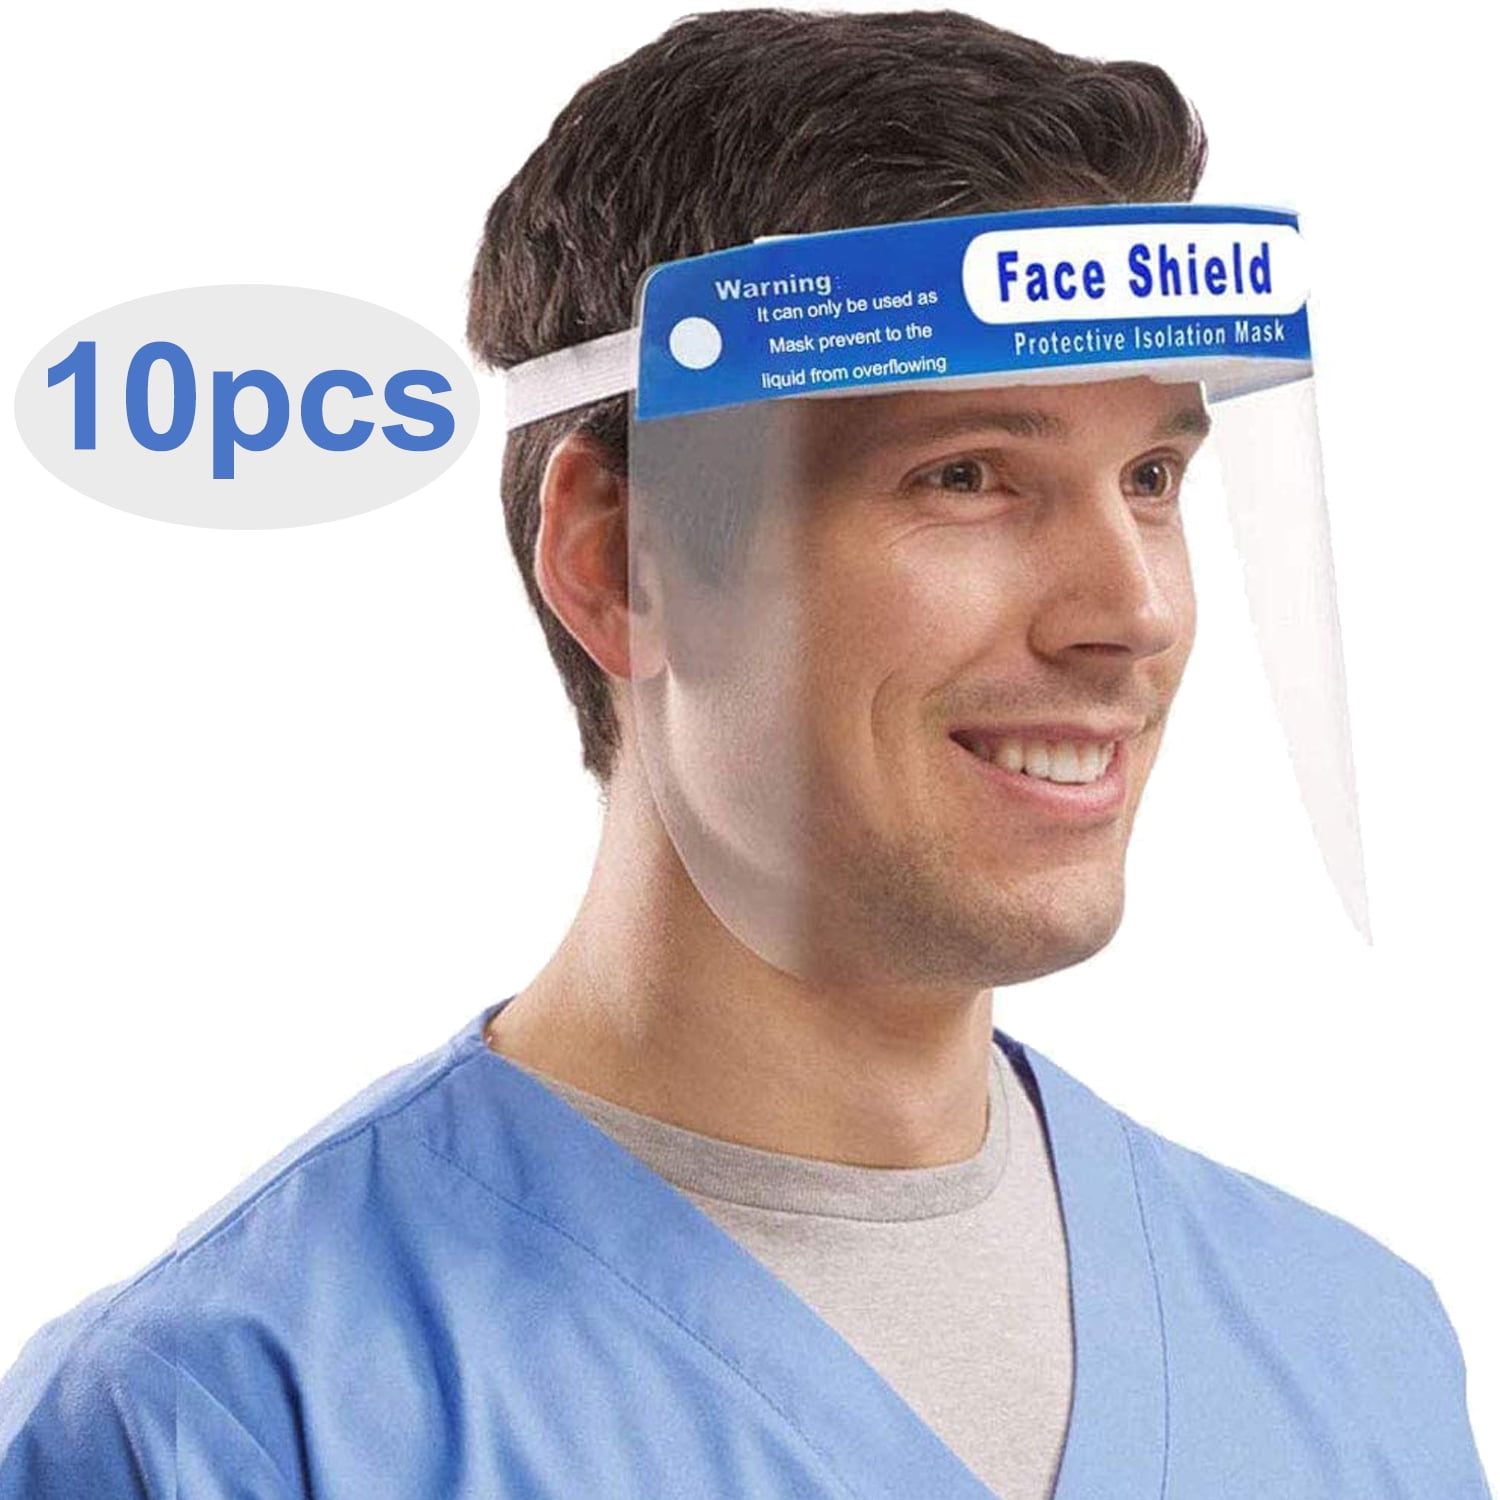 Safety Full Face Shield Cooking Guard Clear Goggles Visor Hat Anti-Fog Dustproof 